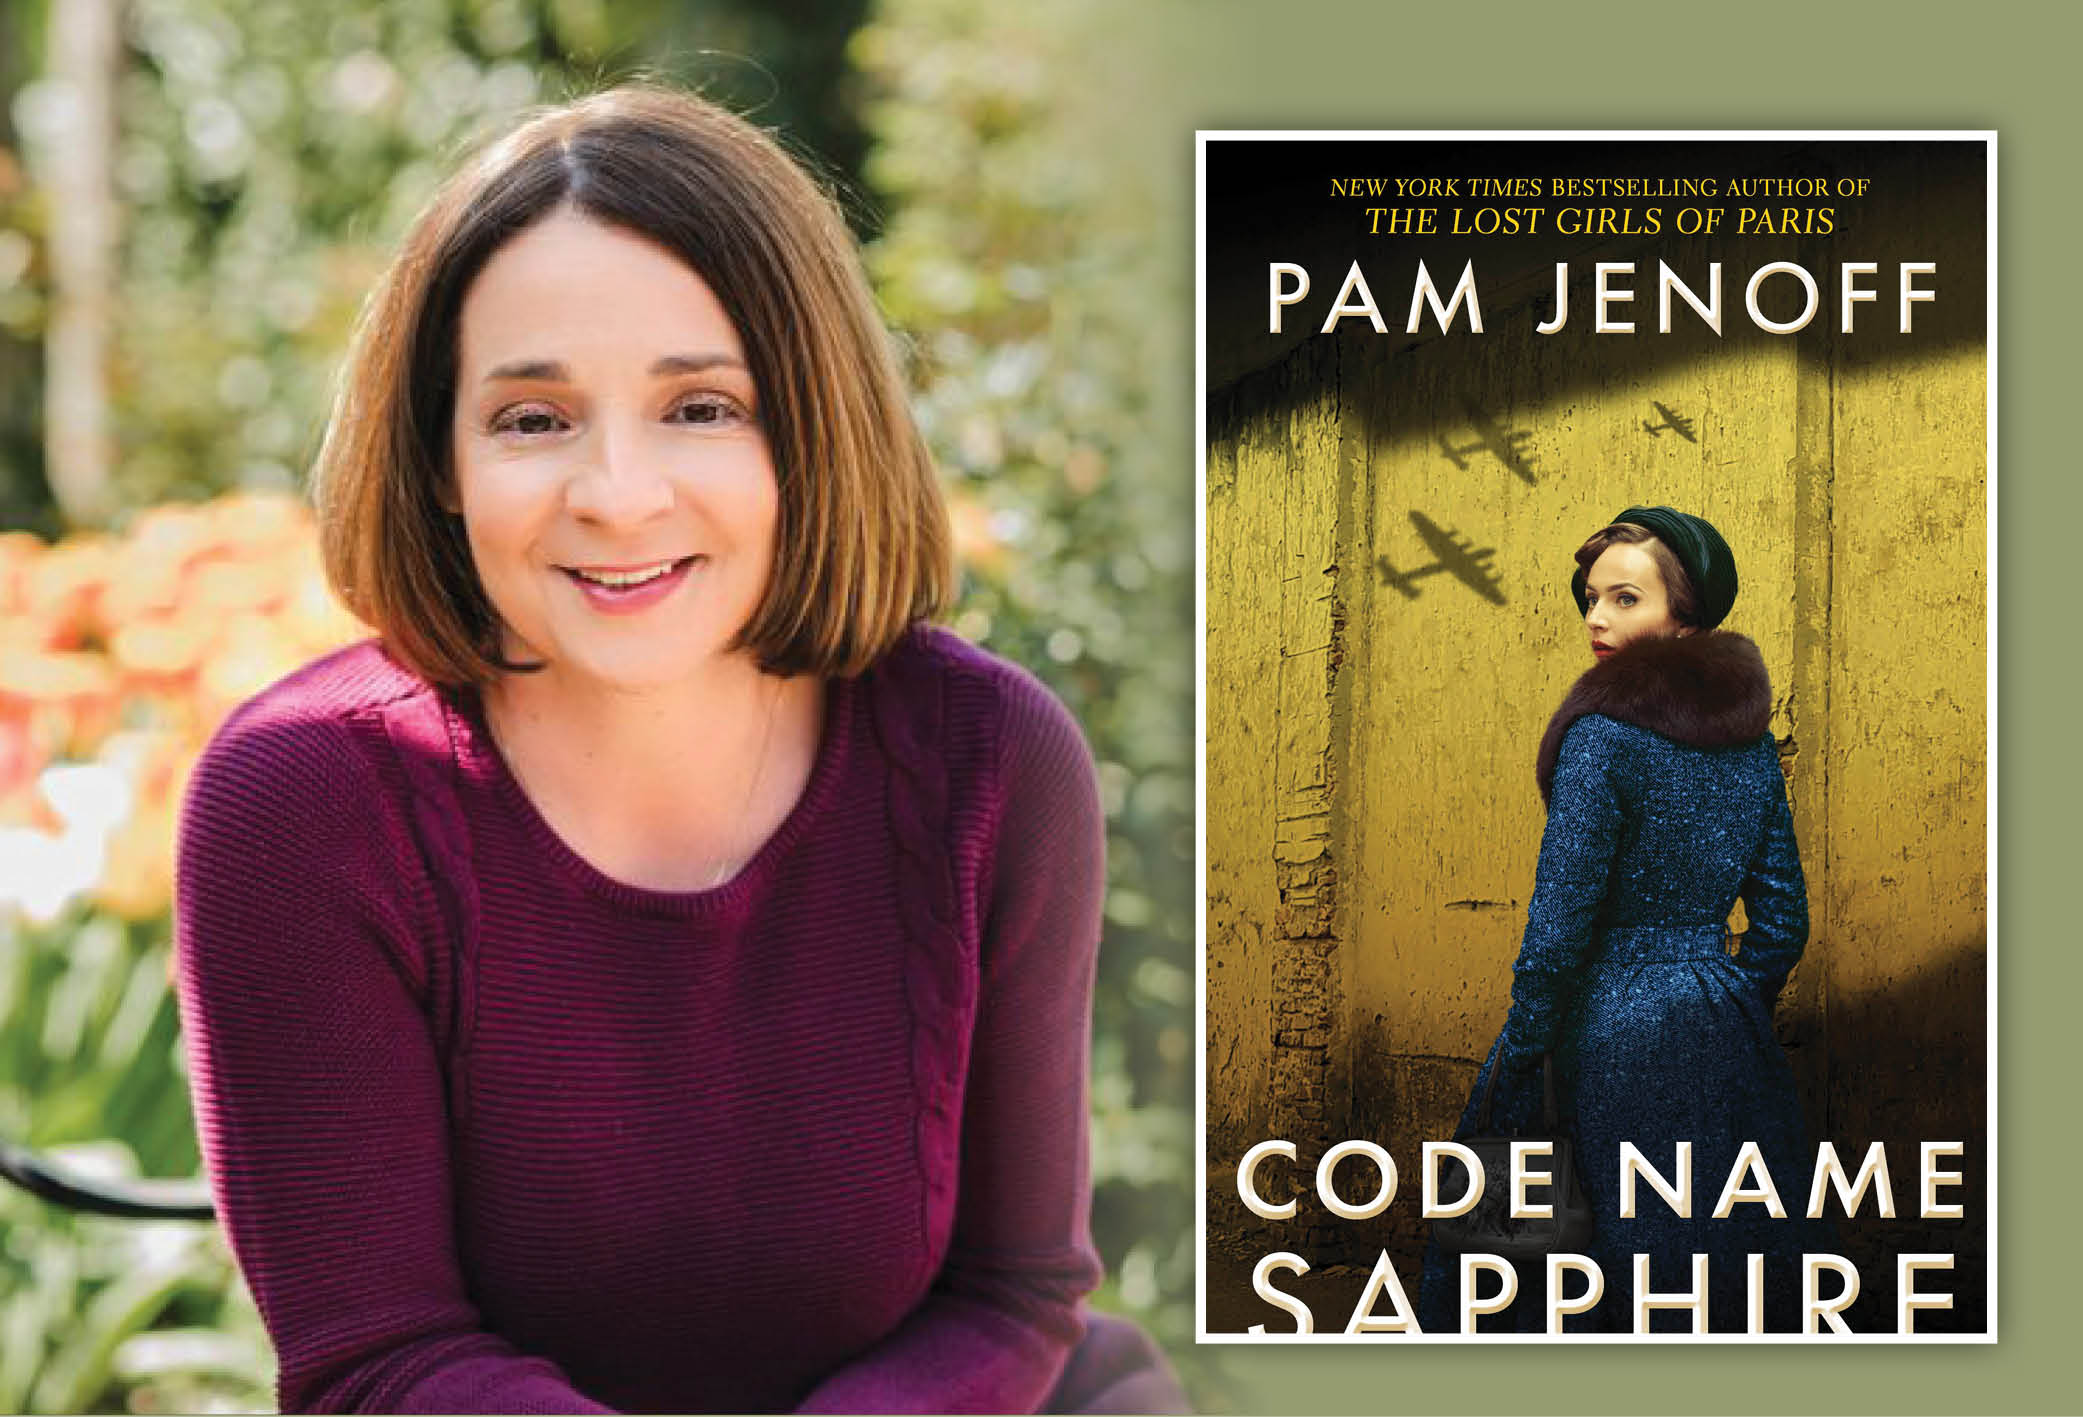 Thursday, February 29 Code Name Sapphire by Pam Jenoff